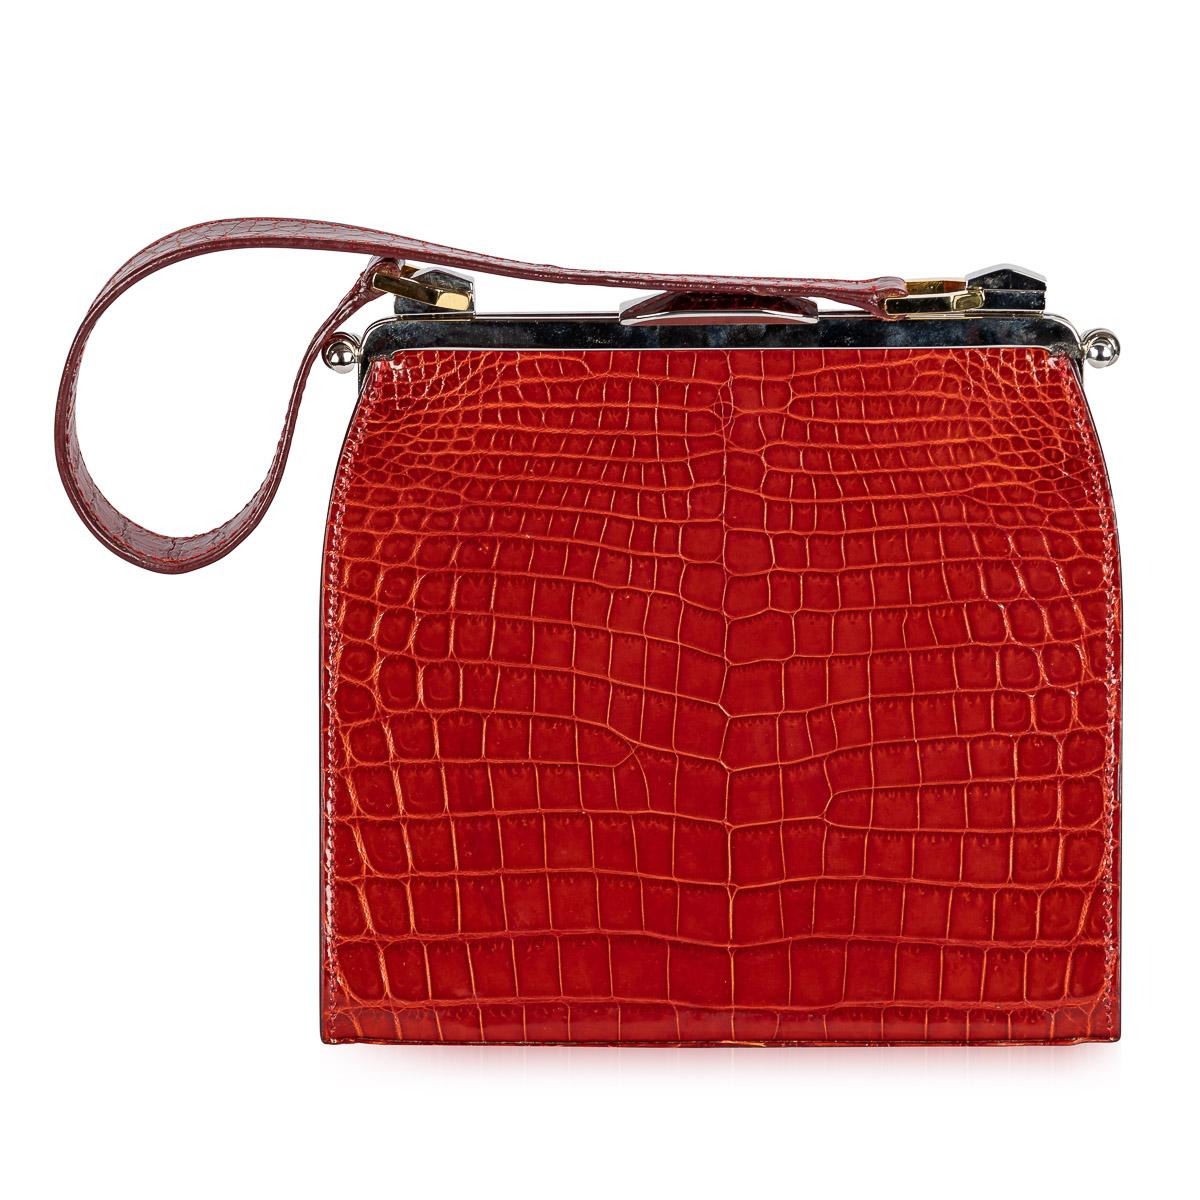 Crafted by Dotti in Roma, Italy during the early 21st Century, this handbag boasts red crocodile leather adorning both its exterior and handle. Gleaming gold and palladium plated hardware, from its clasp to the clam shell opening system, accentuates